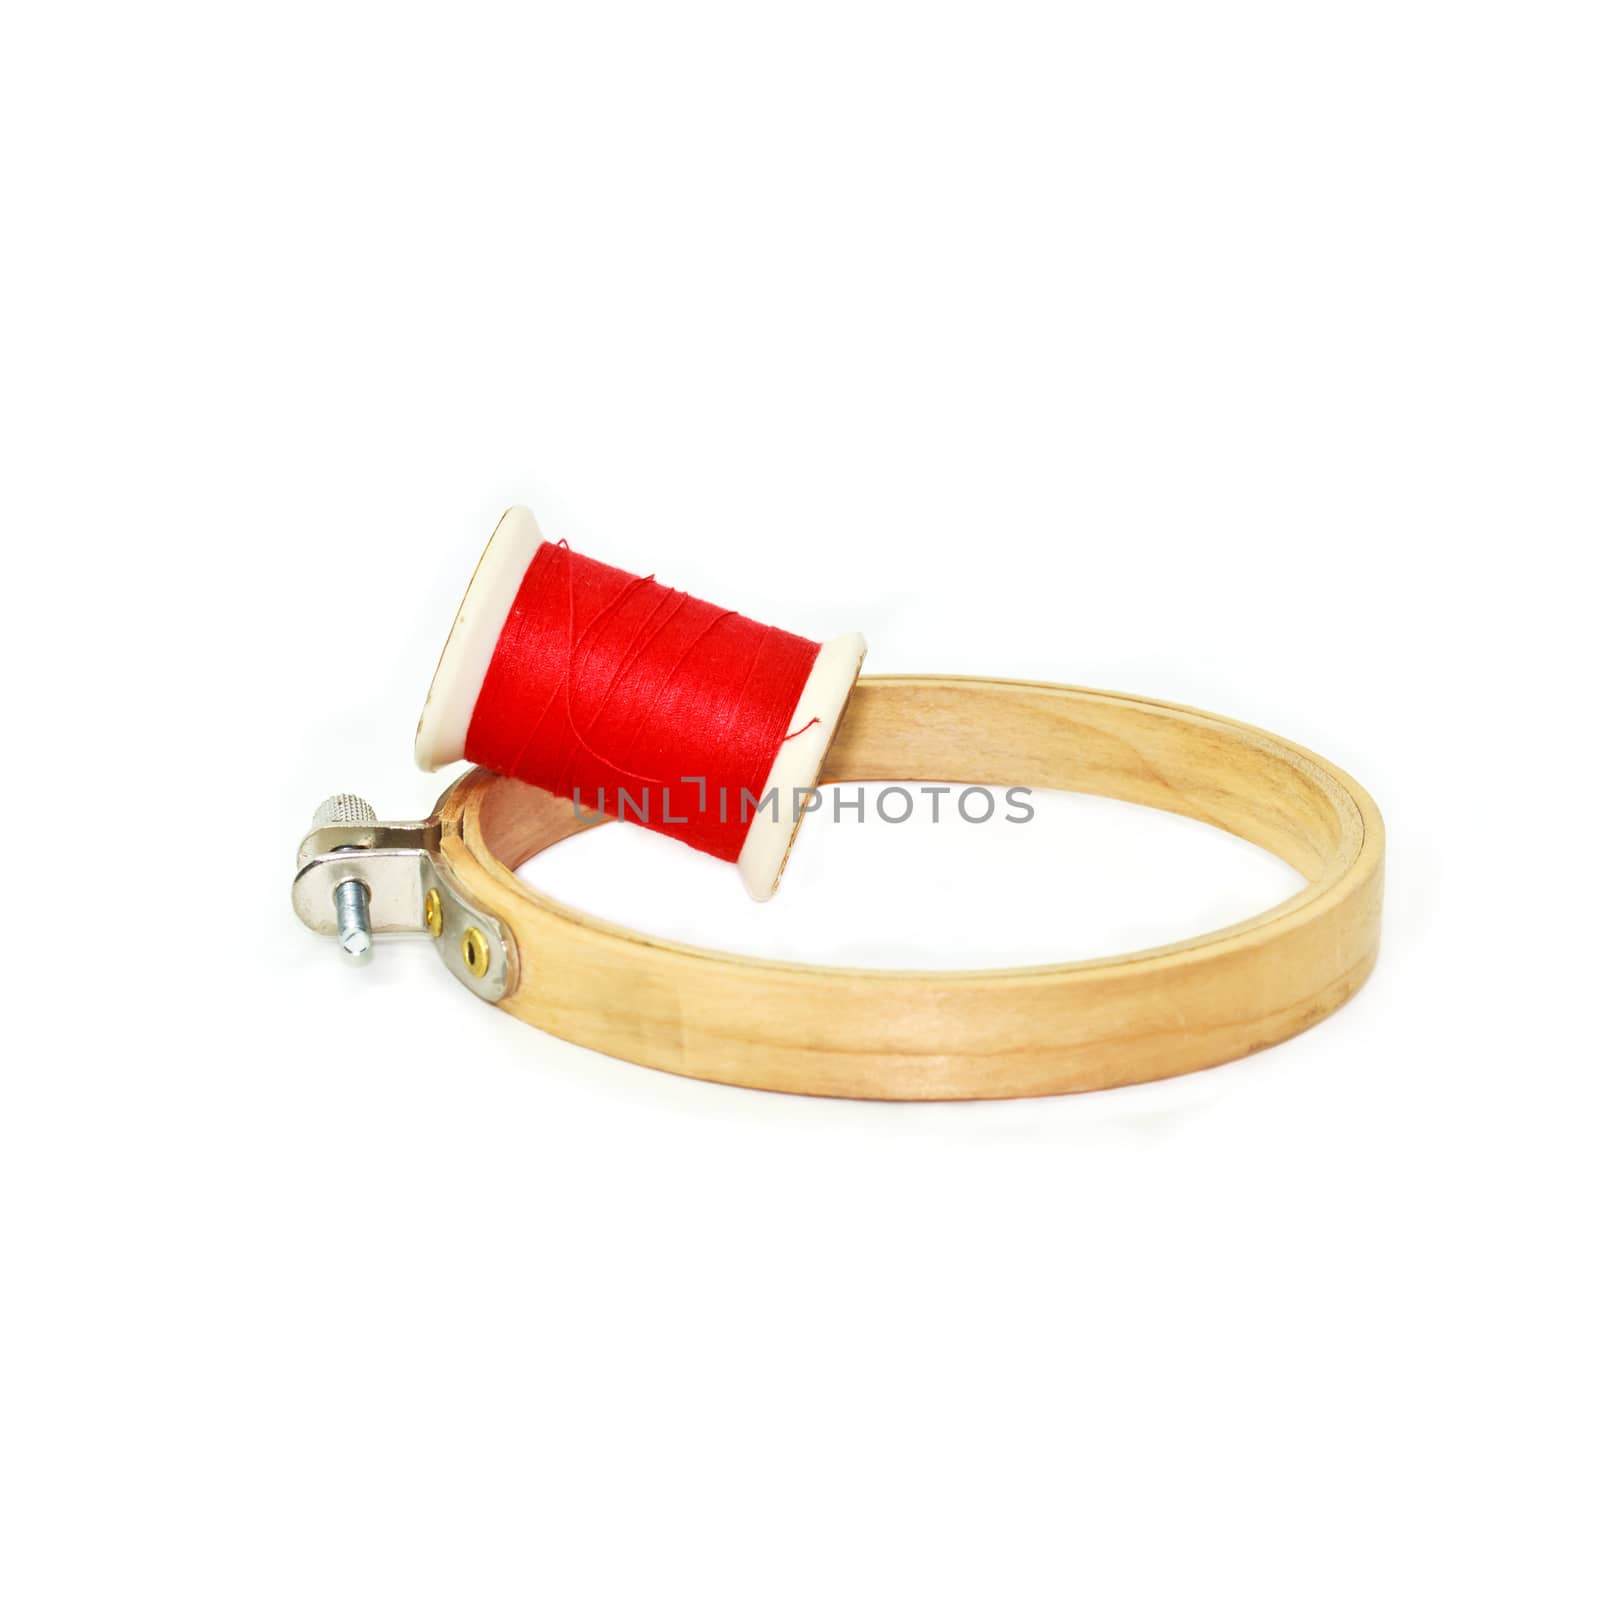 Thread and equipment isolated on white background